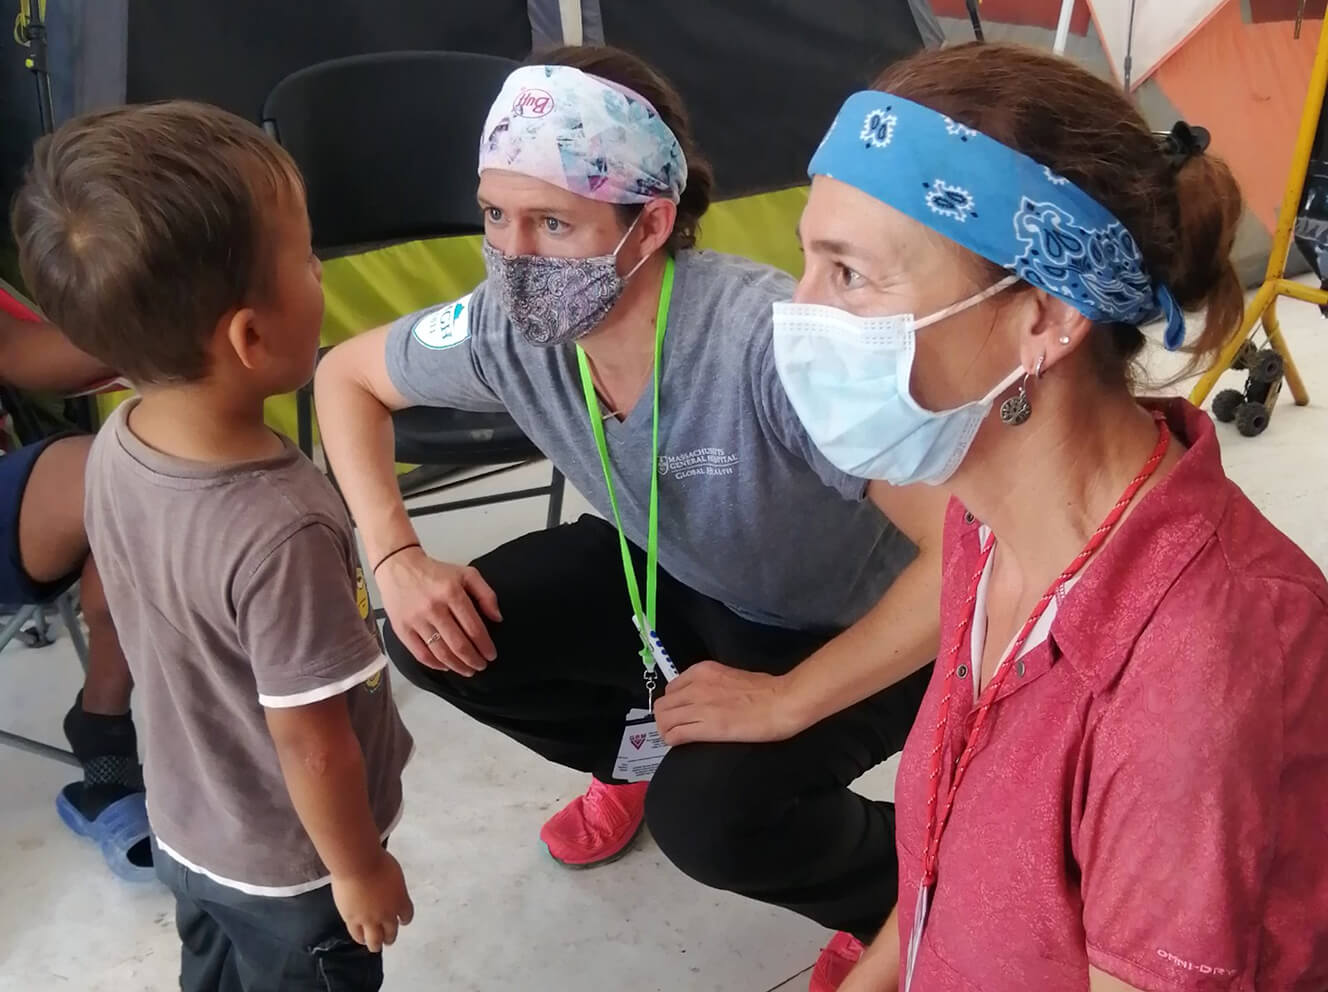 Lindsay Martin, NP, director of Global Disaster Response and Humanitarian Action, and Mary Sebert, RN, MPH, director of Global Nursing, interview a child at a migrant clinic in Matamoros, Mexico.